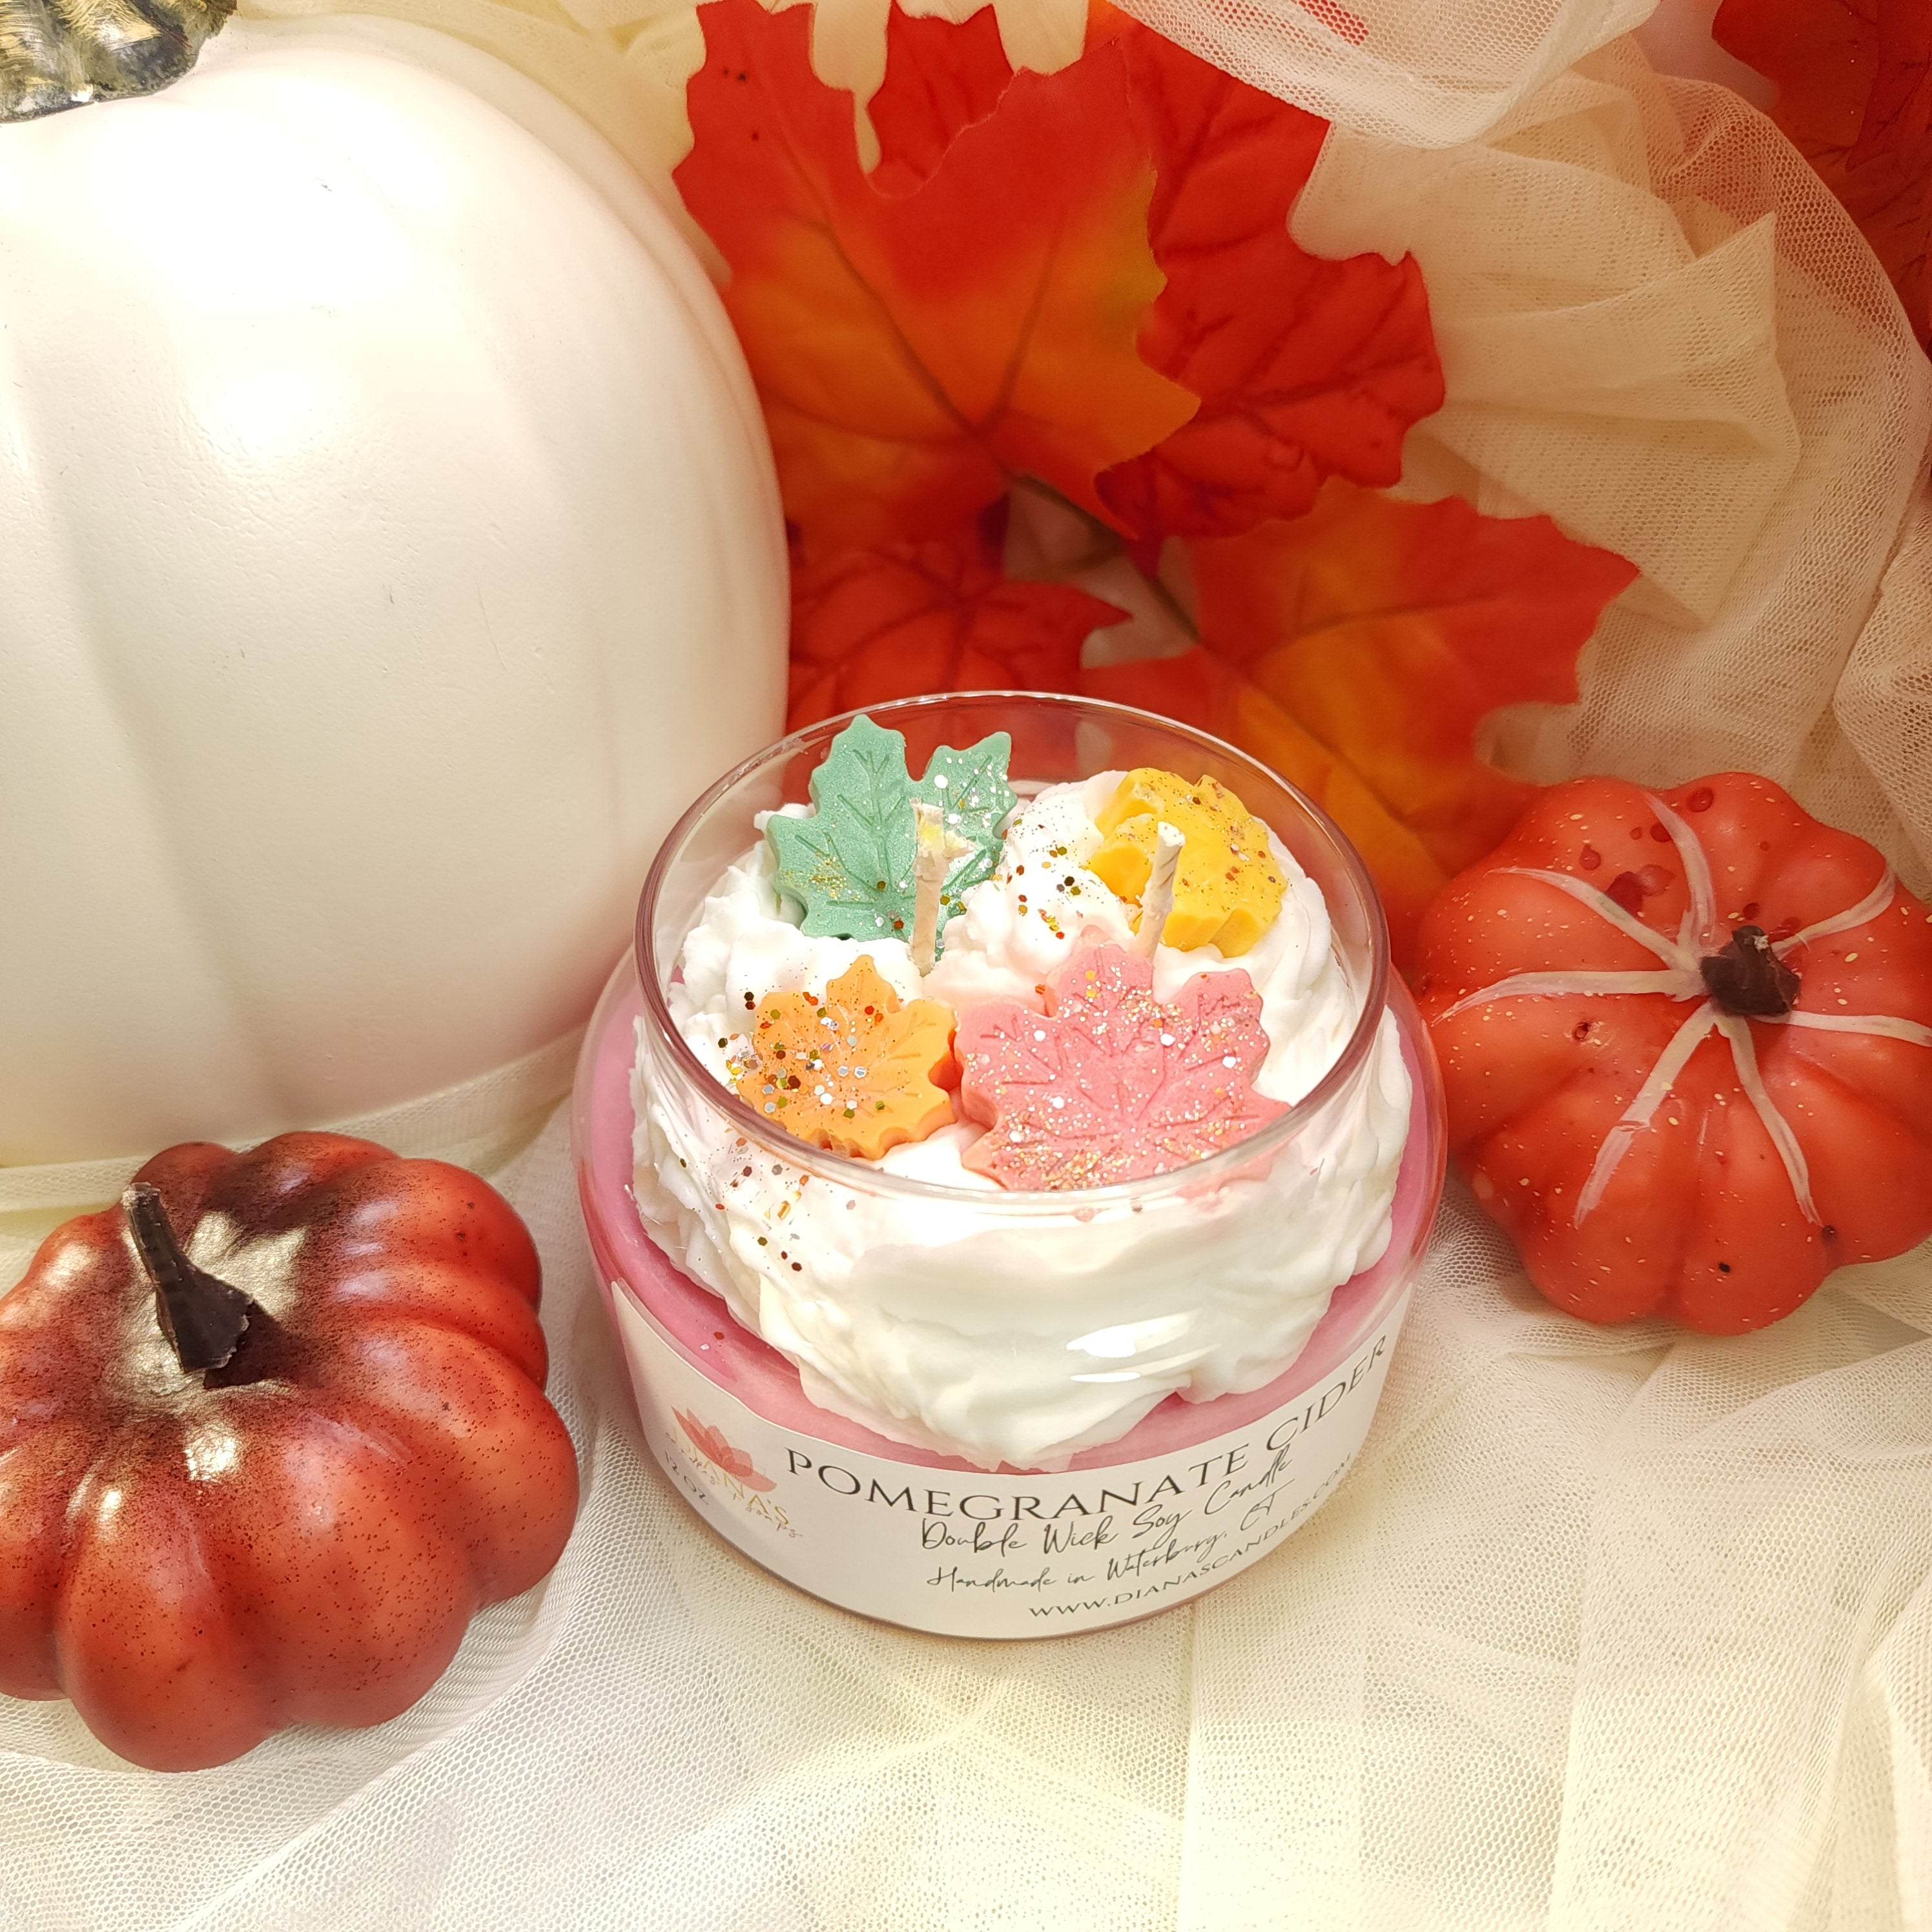 Pomegranate Cider Double Wick Candle Diana's Candles and Soaps 